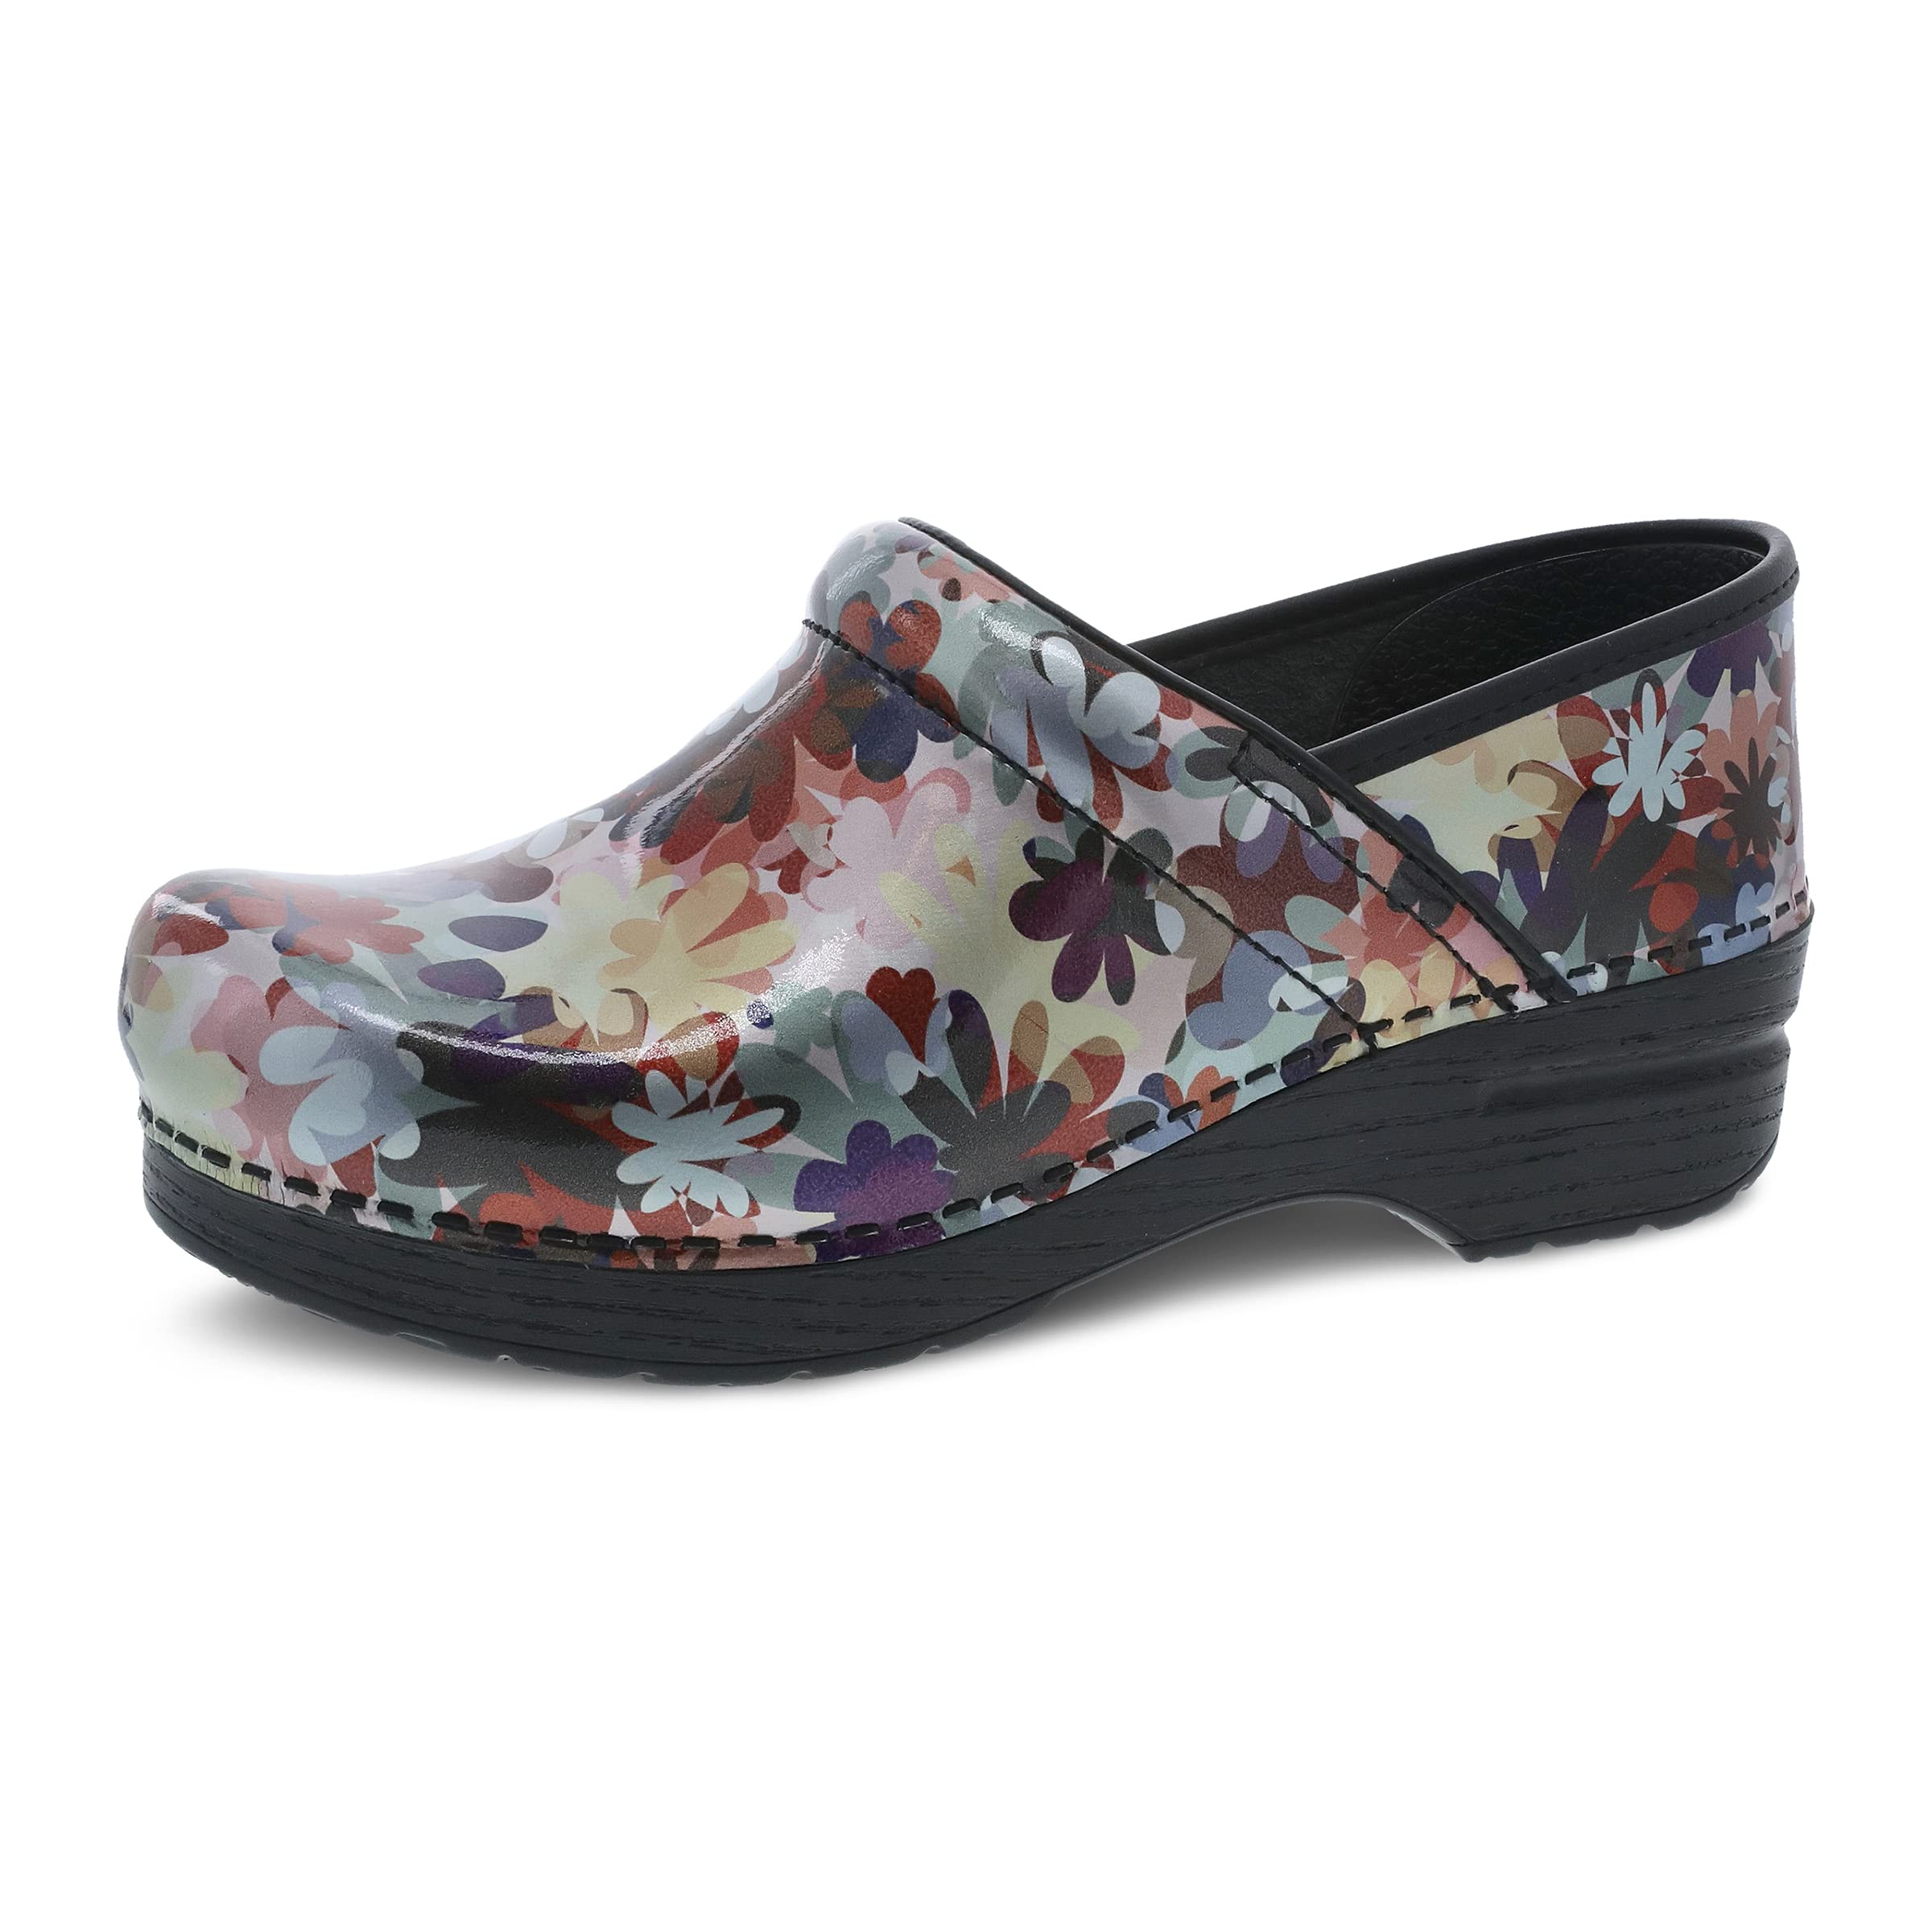 Dansko Womens Professional Boho Flower Slip-On clogs 65-7 M US - Anti-Fatigue Rocker Sole and Arch Support for comfort